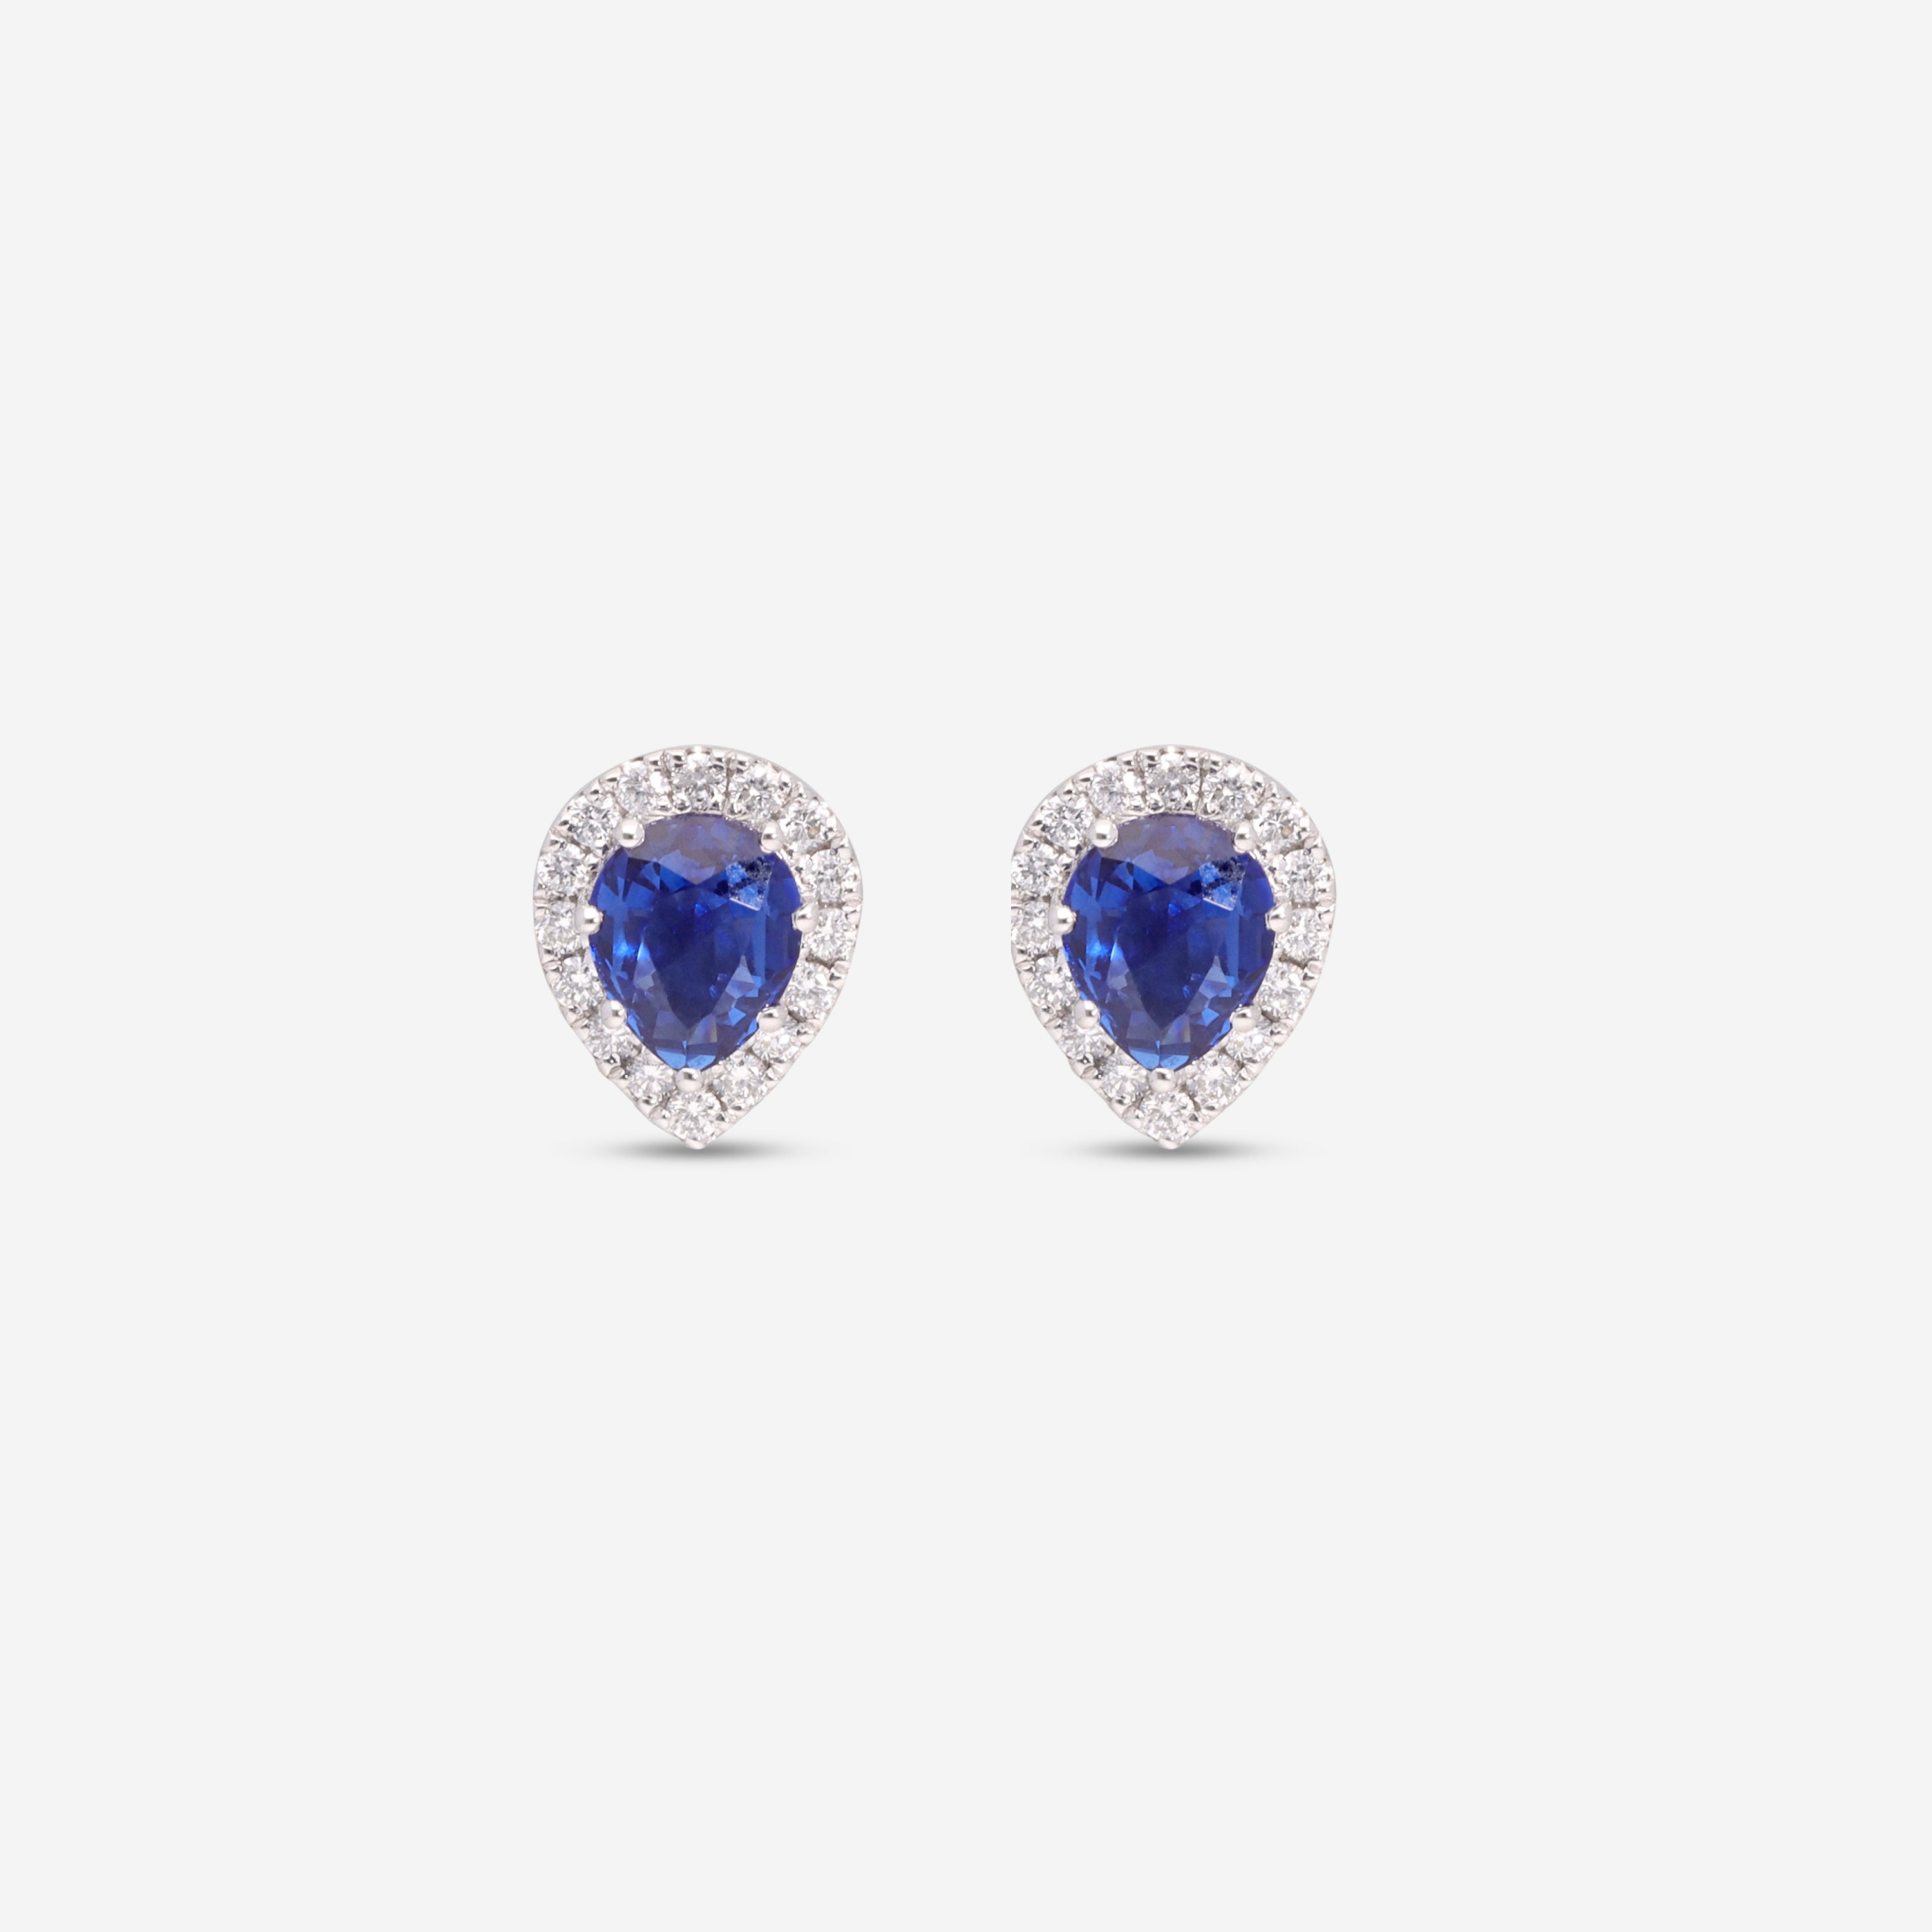 Ina Mar 14K White Gold Pear Shaped Sapphire with Diamonds Halo Stud Earrings ER-077554-Sapp - THE SOLIST